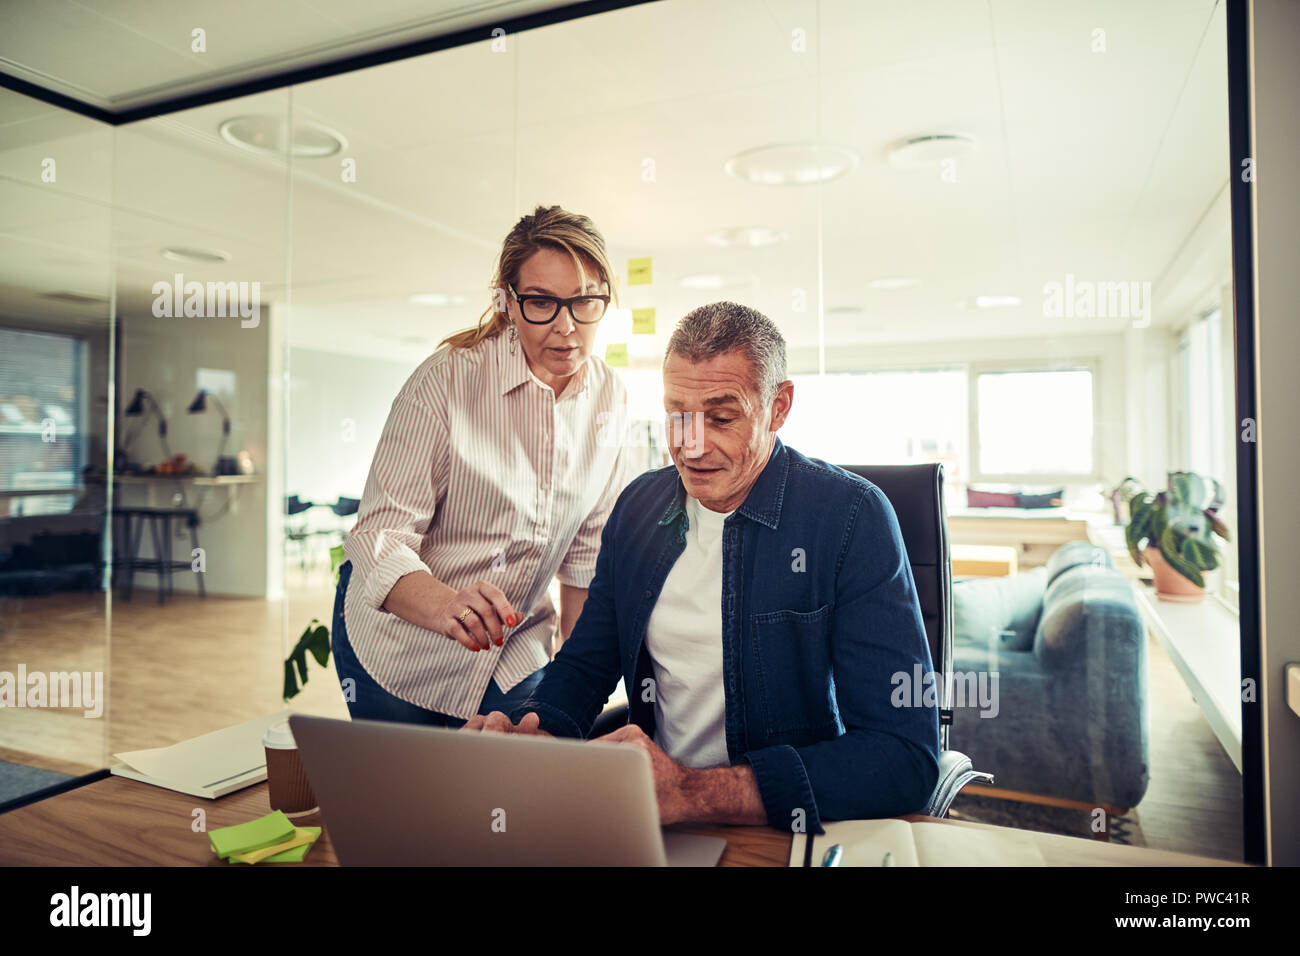 Two mature businesspeople talking together over a laptop while working at a desk in a modern office Stock Photo